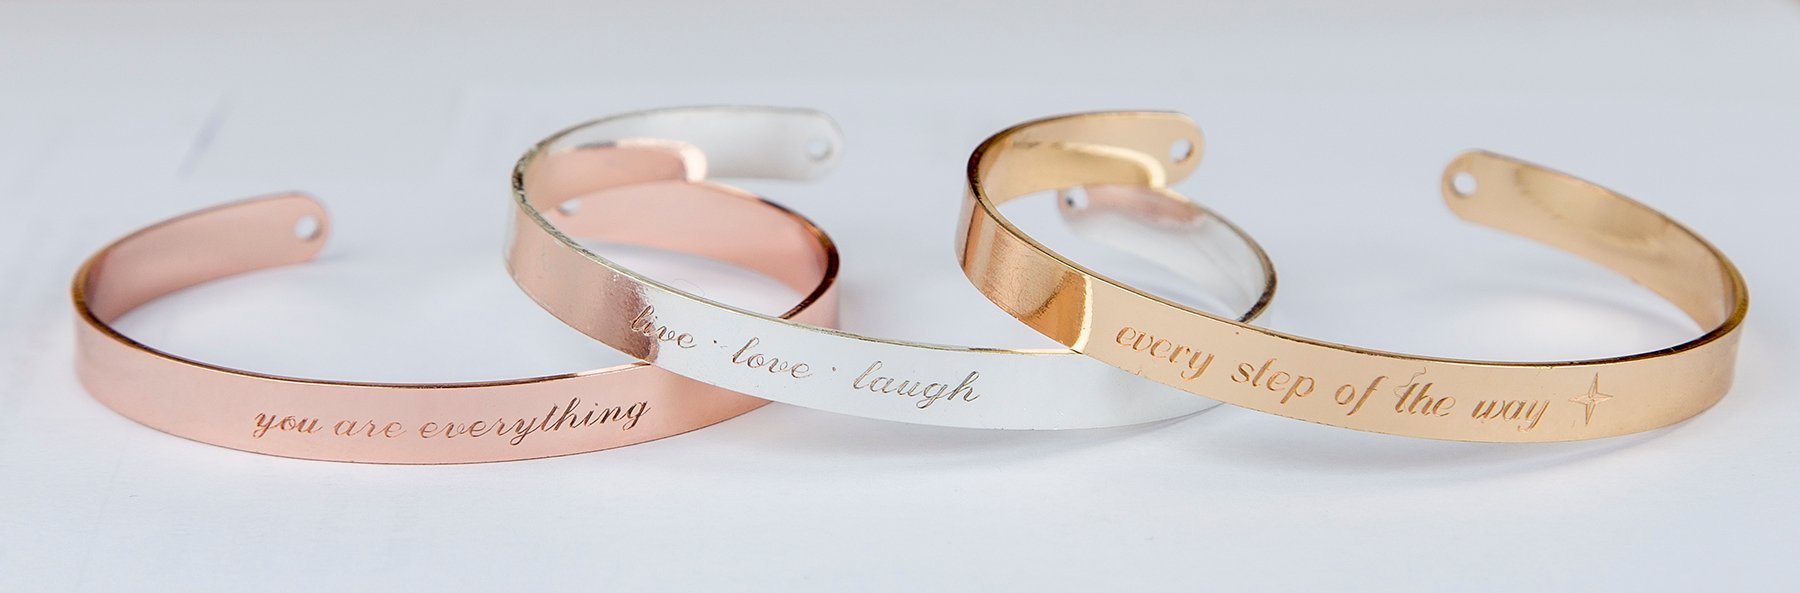 Engraved bracelet, personalized inspirational quote engraved gift, mom